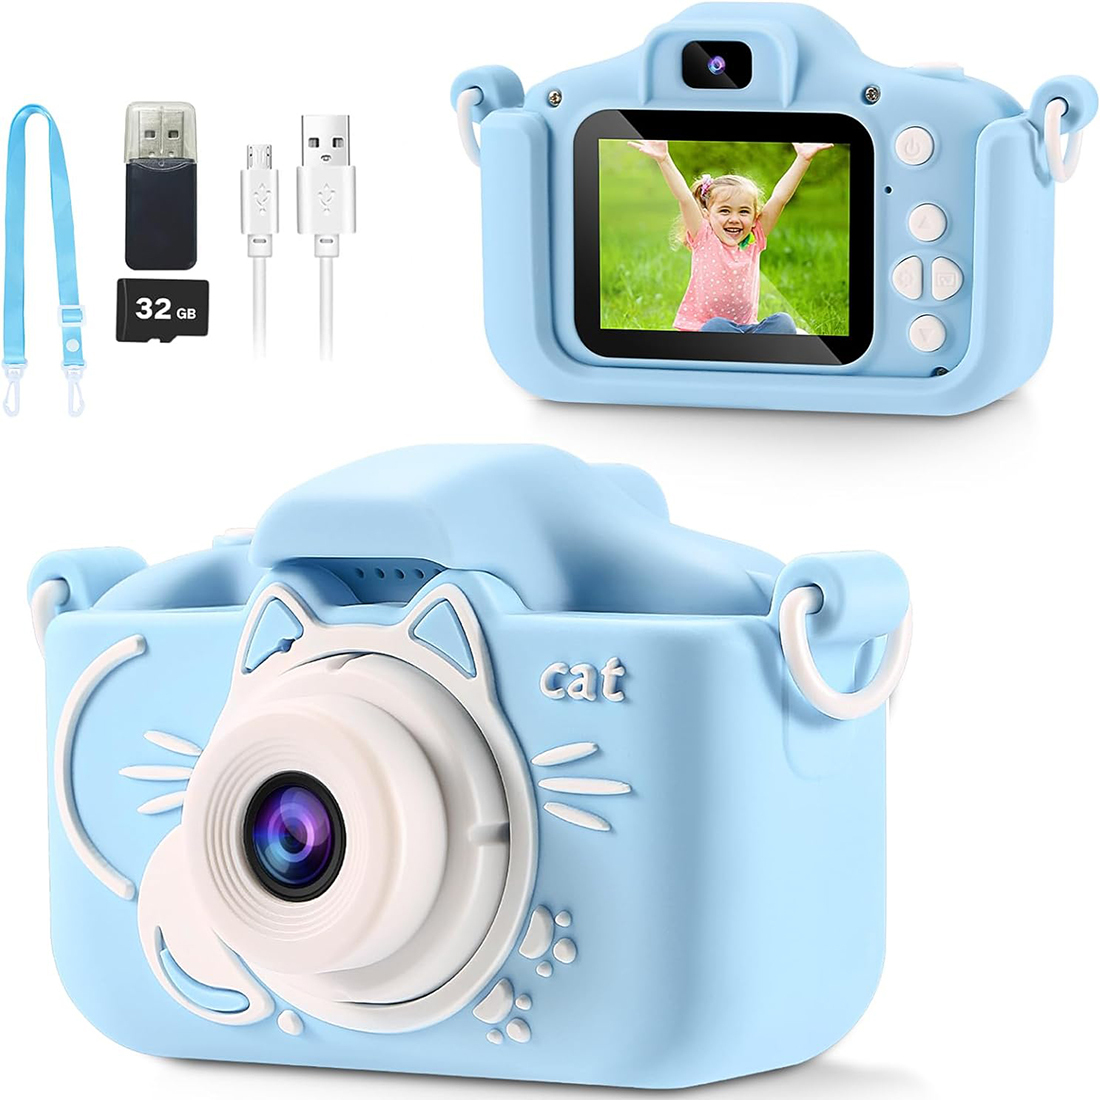 Kids Camera for Girls, 2 Lens Selfie Kids Camera,HD Kids Digital Camera Toys for 4 5 6 7 8 9 Year Old Girl Christmas Birthday Gifts,MP3 Player,Camera for Kids 10-12,Toddler Camera with 32GB-Card Blue